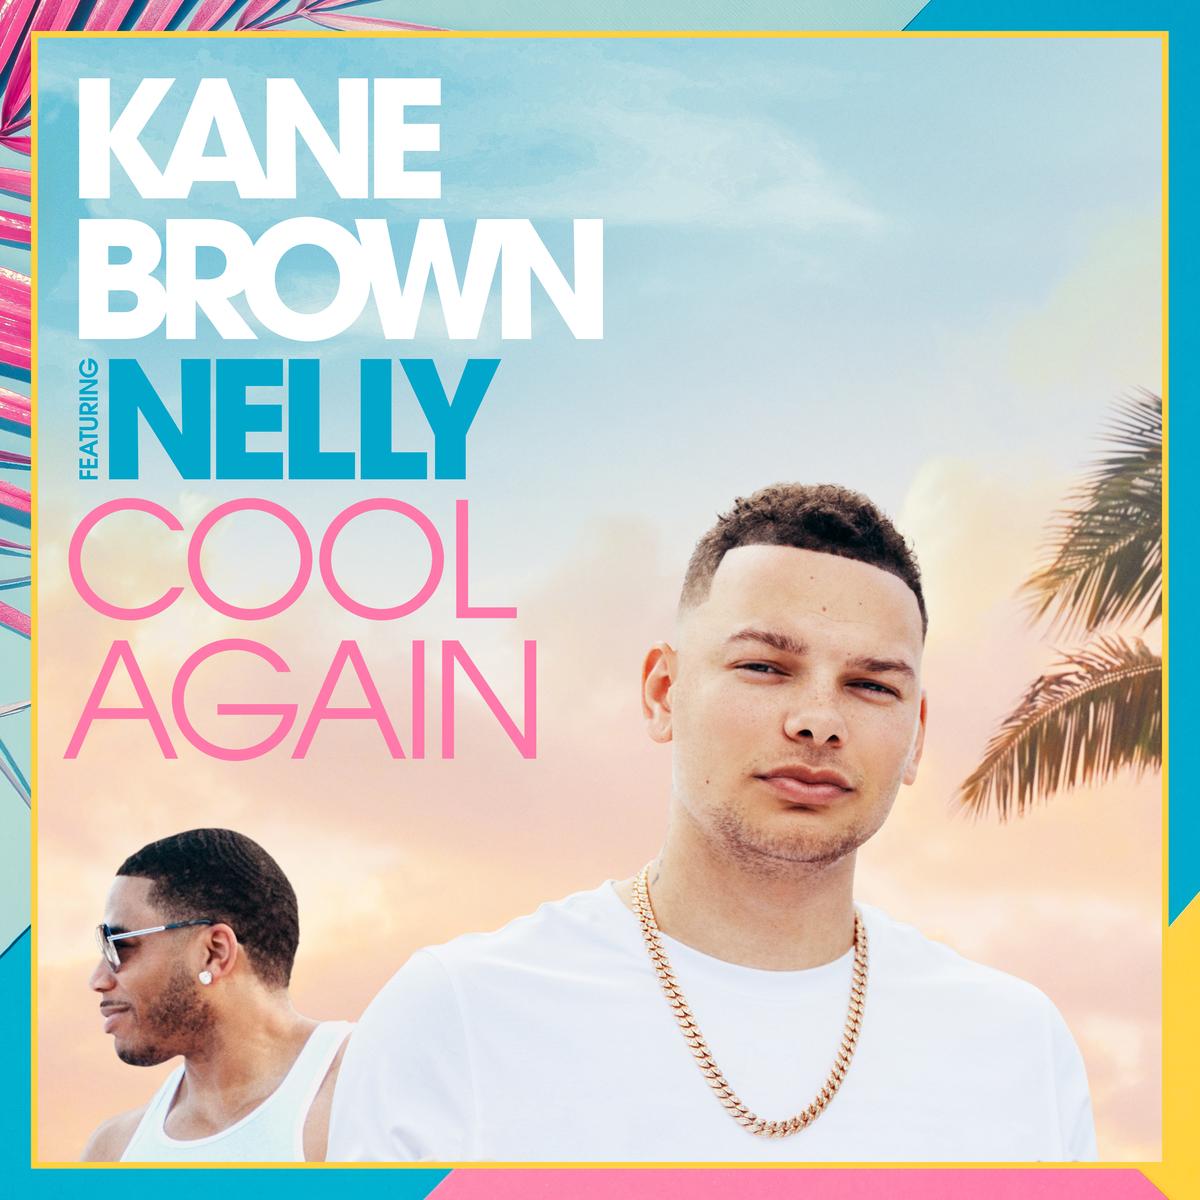 Kane Brown Nelly Cool Again